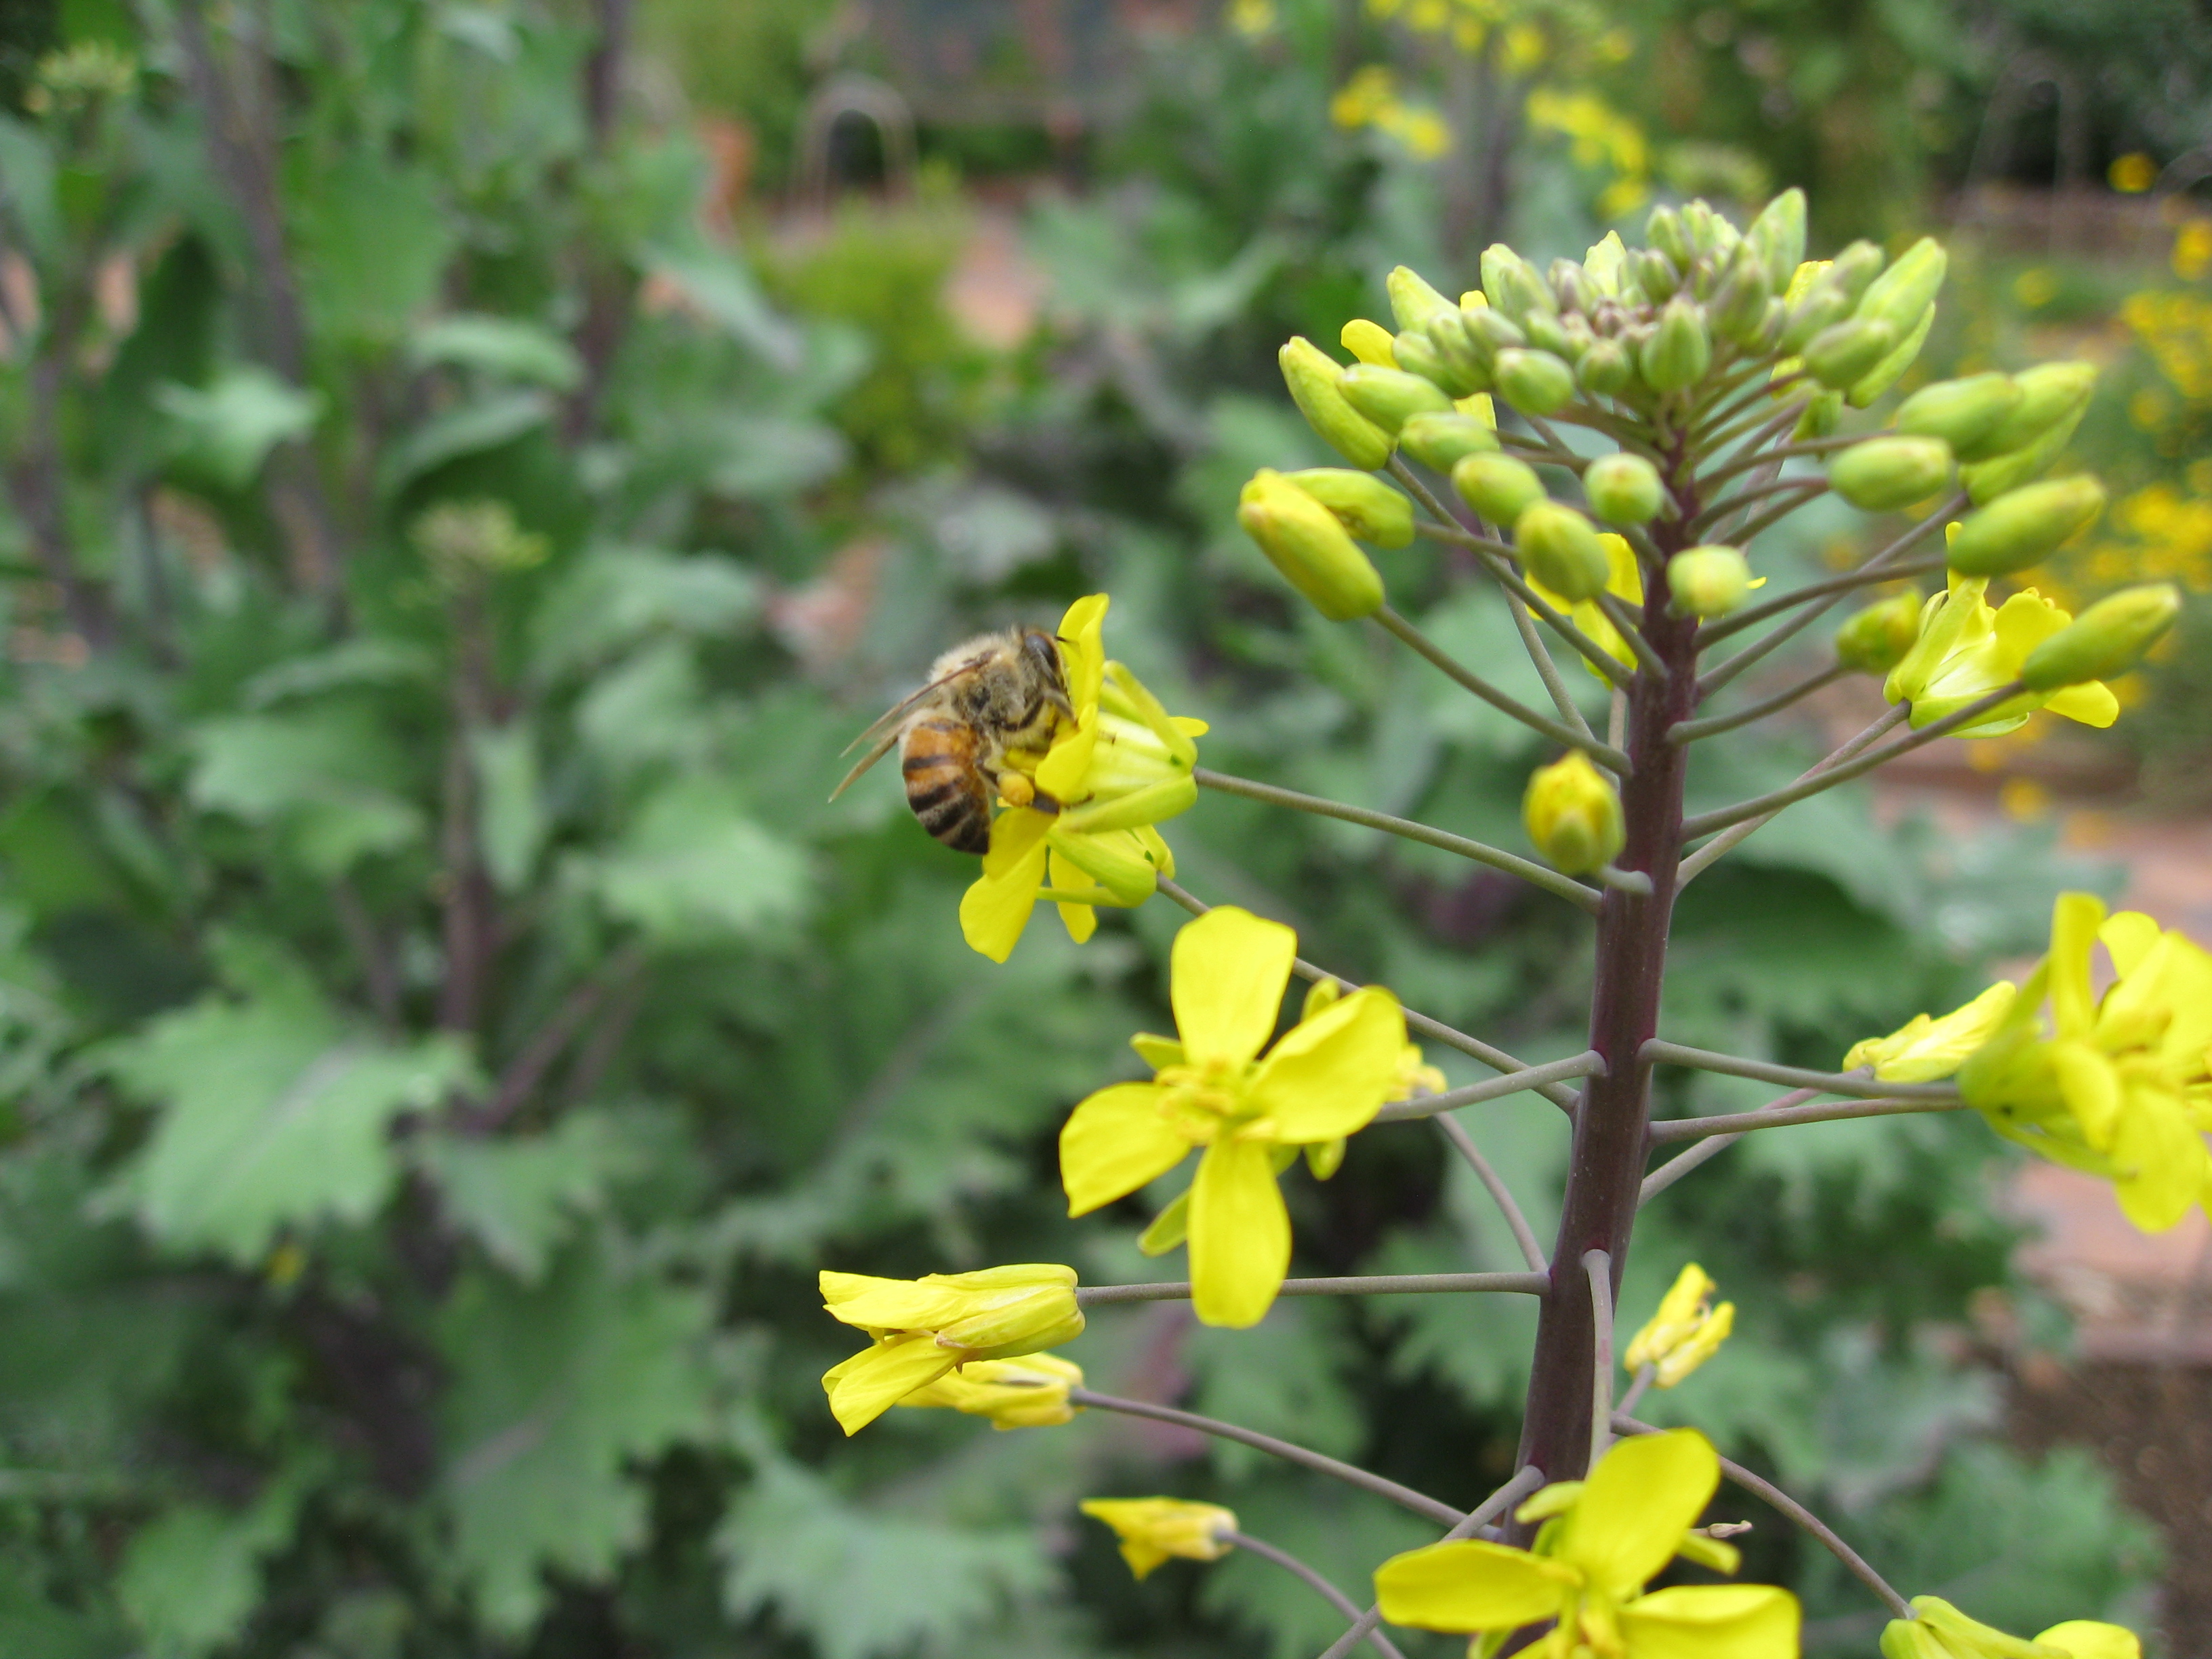 The bees enjoyed the flowers of bolting kale and mustard greens. 